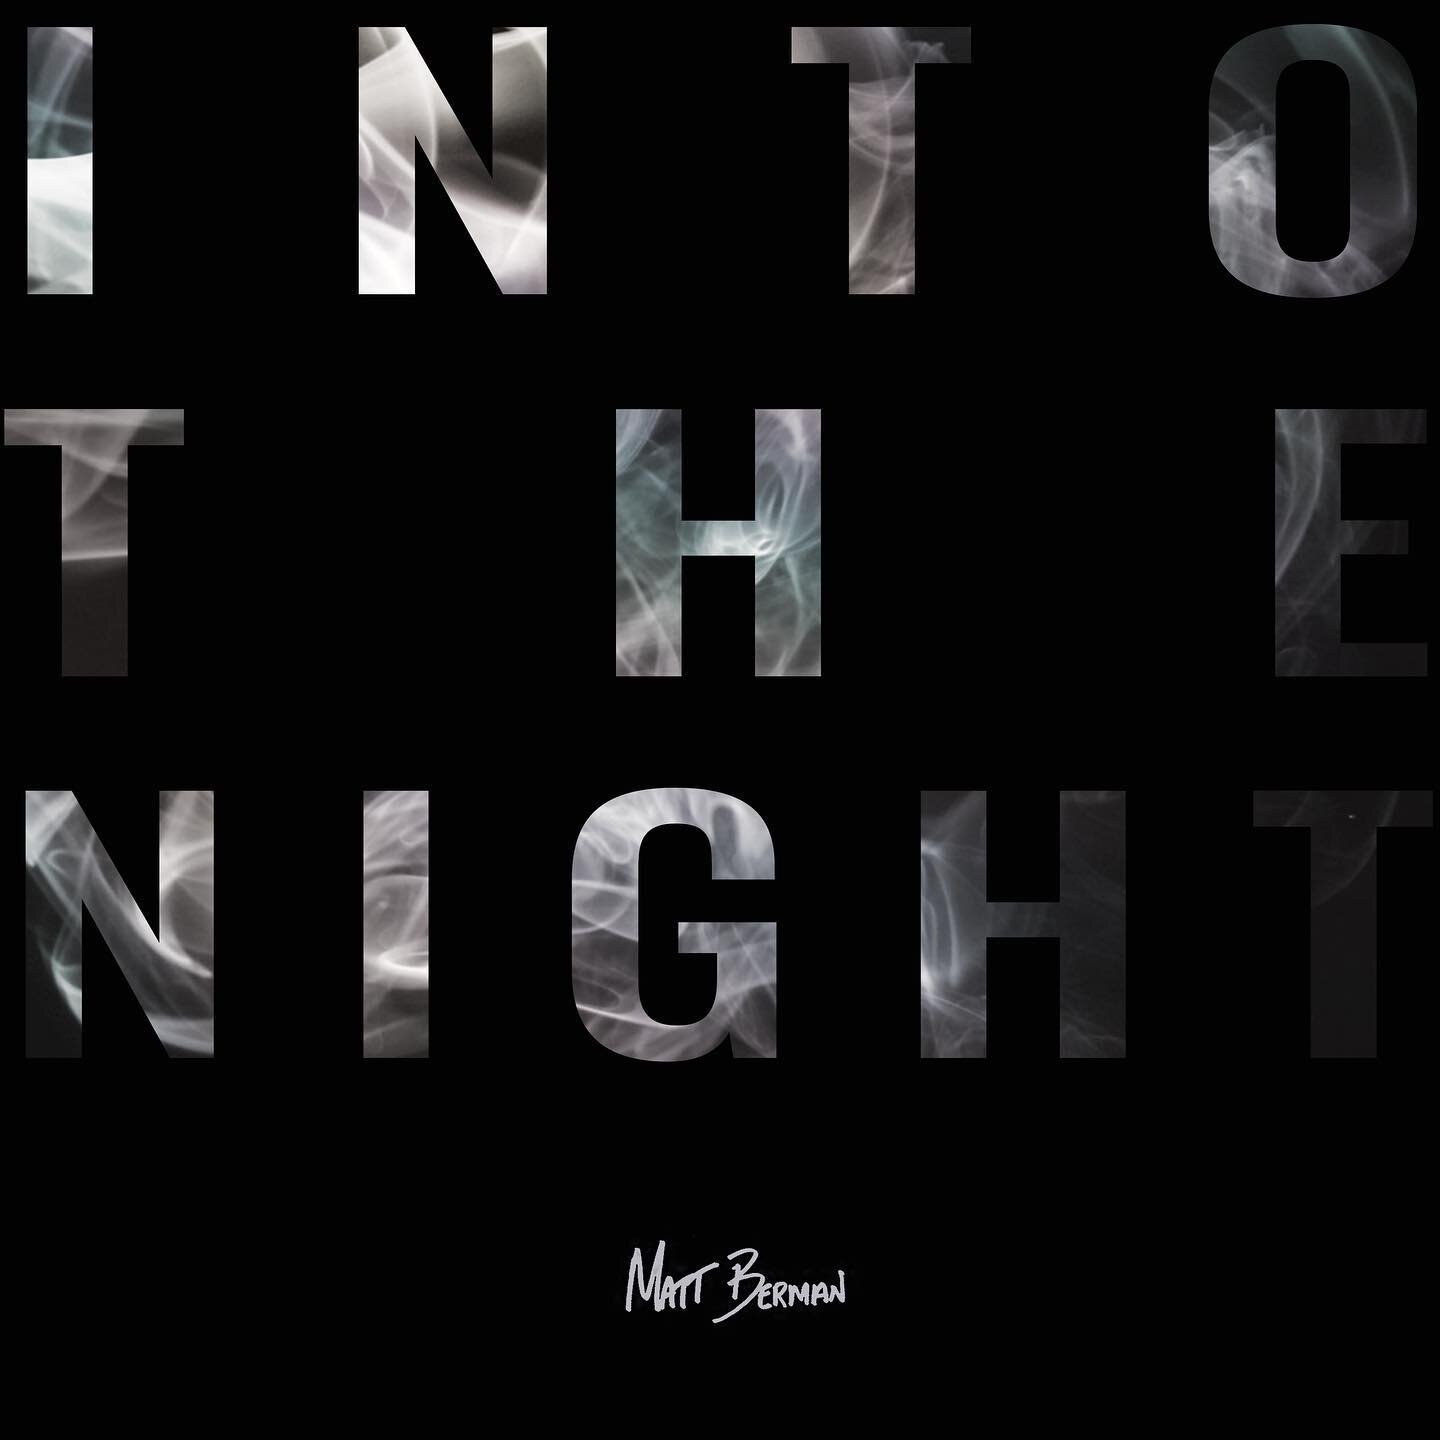 Beyond excited to announce the single is officially out! Link in bio to listen. #intothenight #mattberman #newsingle